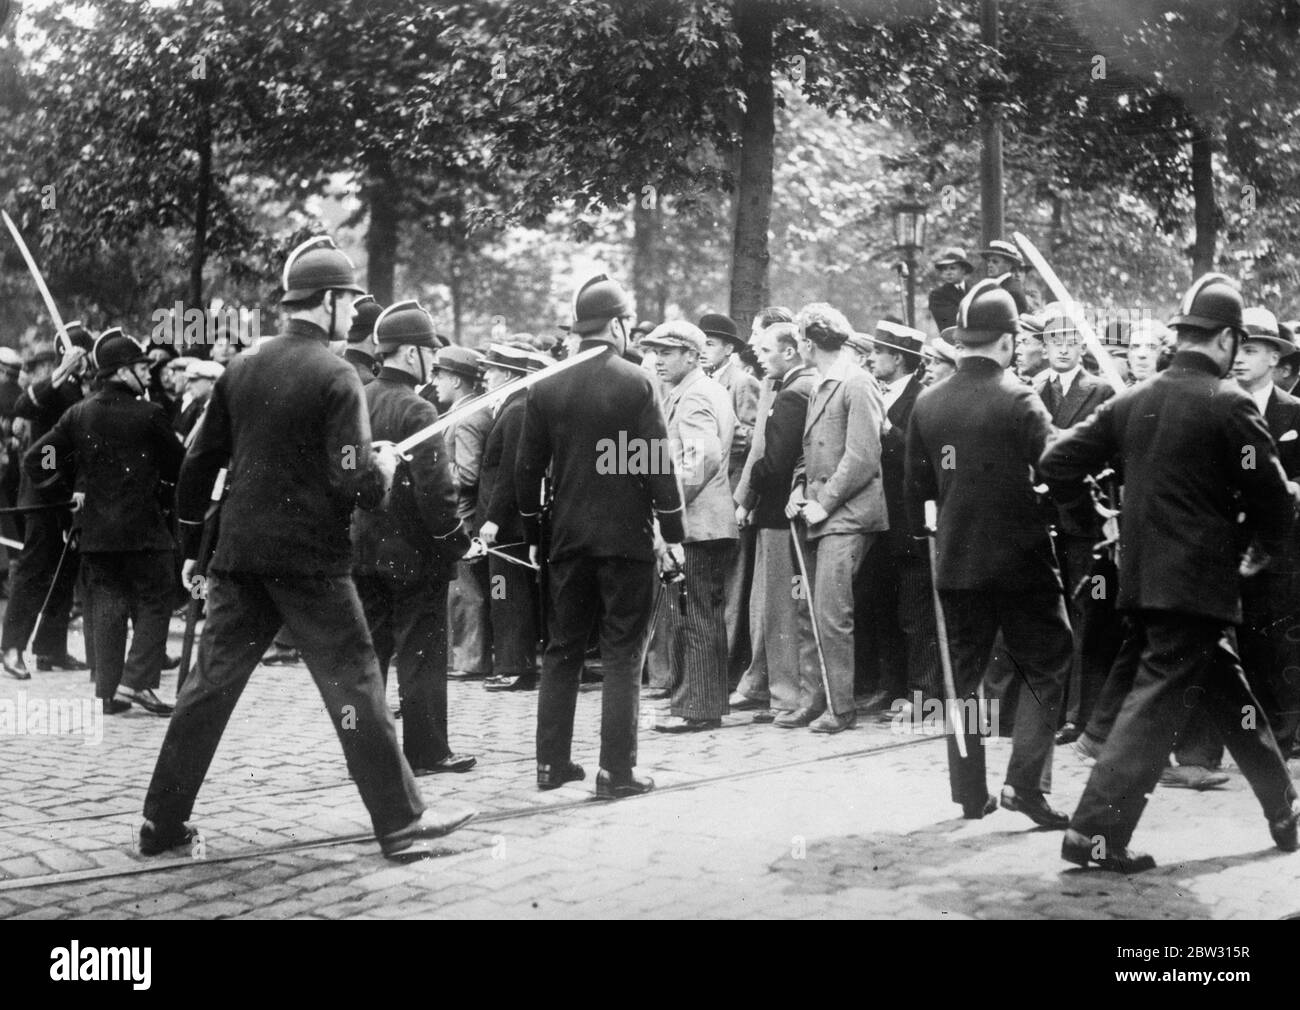 Police drive rioters from Berlin streets with waterbuns . Employing powerful water guns , mounted on armoured lorries , police drove rioting Nazis and Communists from the streets . Hundreds of police in cars and trucks were rushed to the suburbs of Berlin where the rioting took place . Policeman use batons to keep crowds back . 27 June 1932 Stock Photo